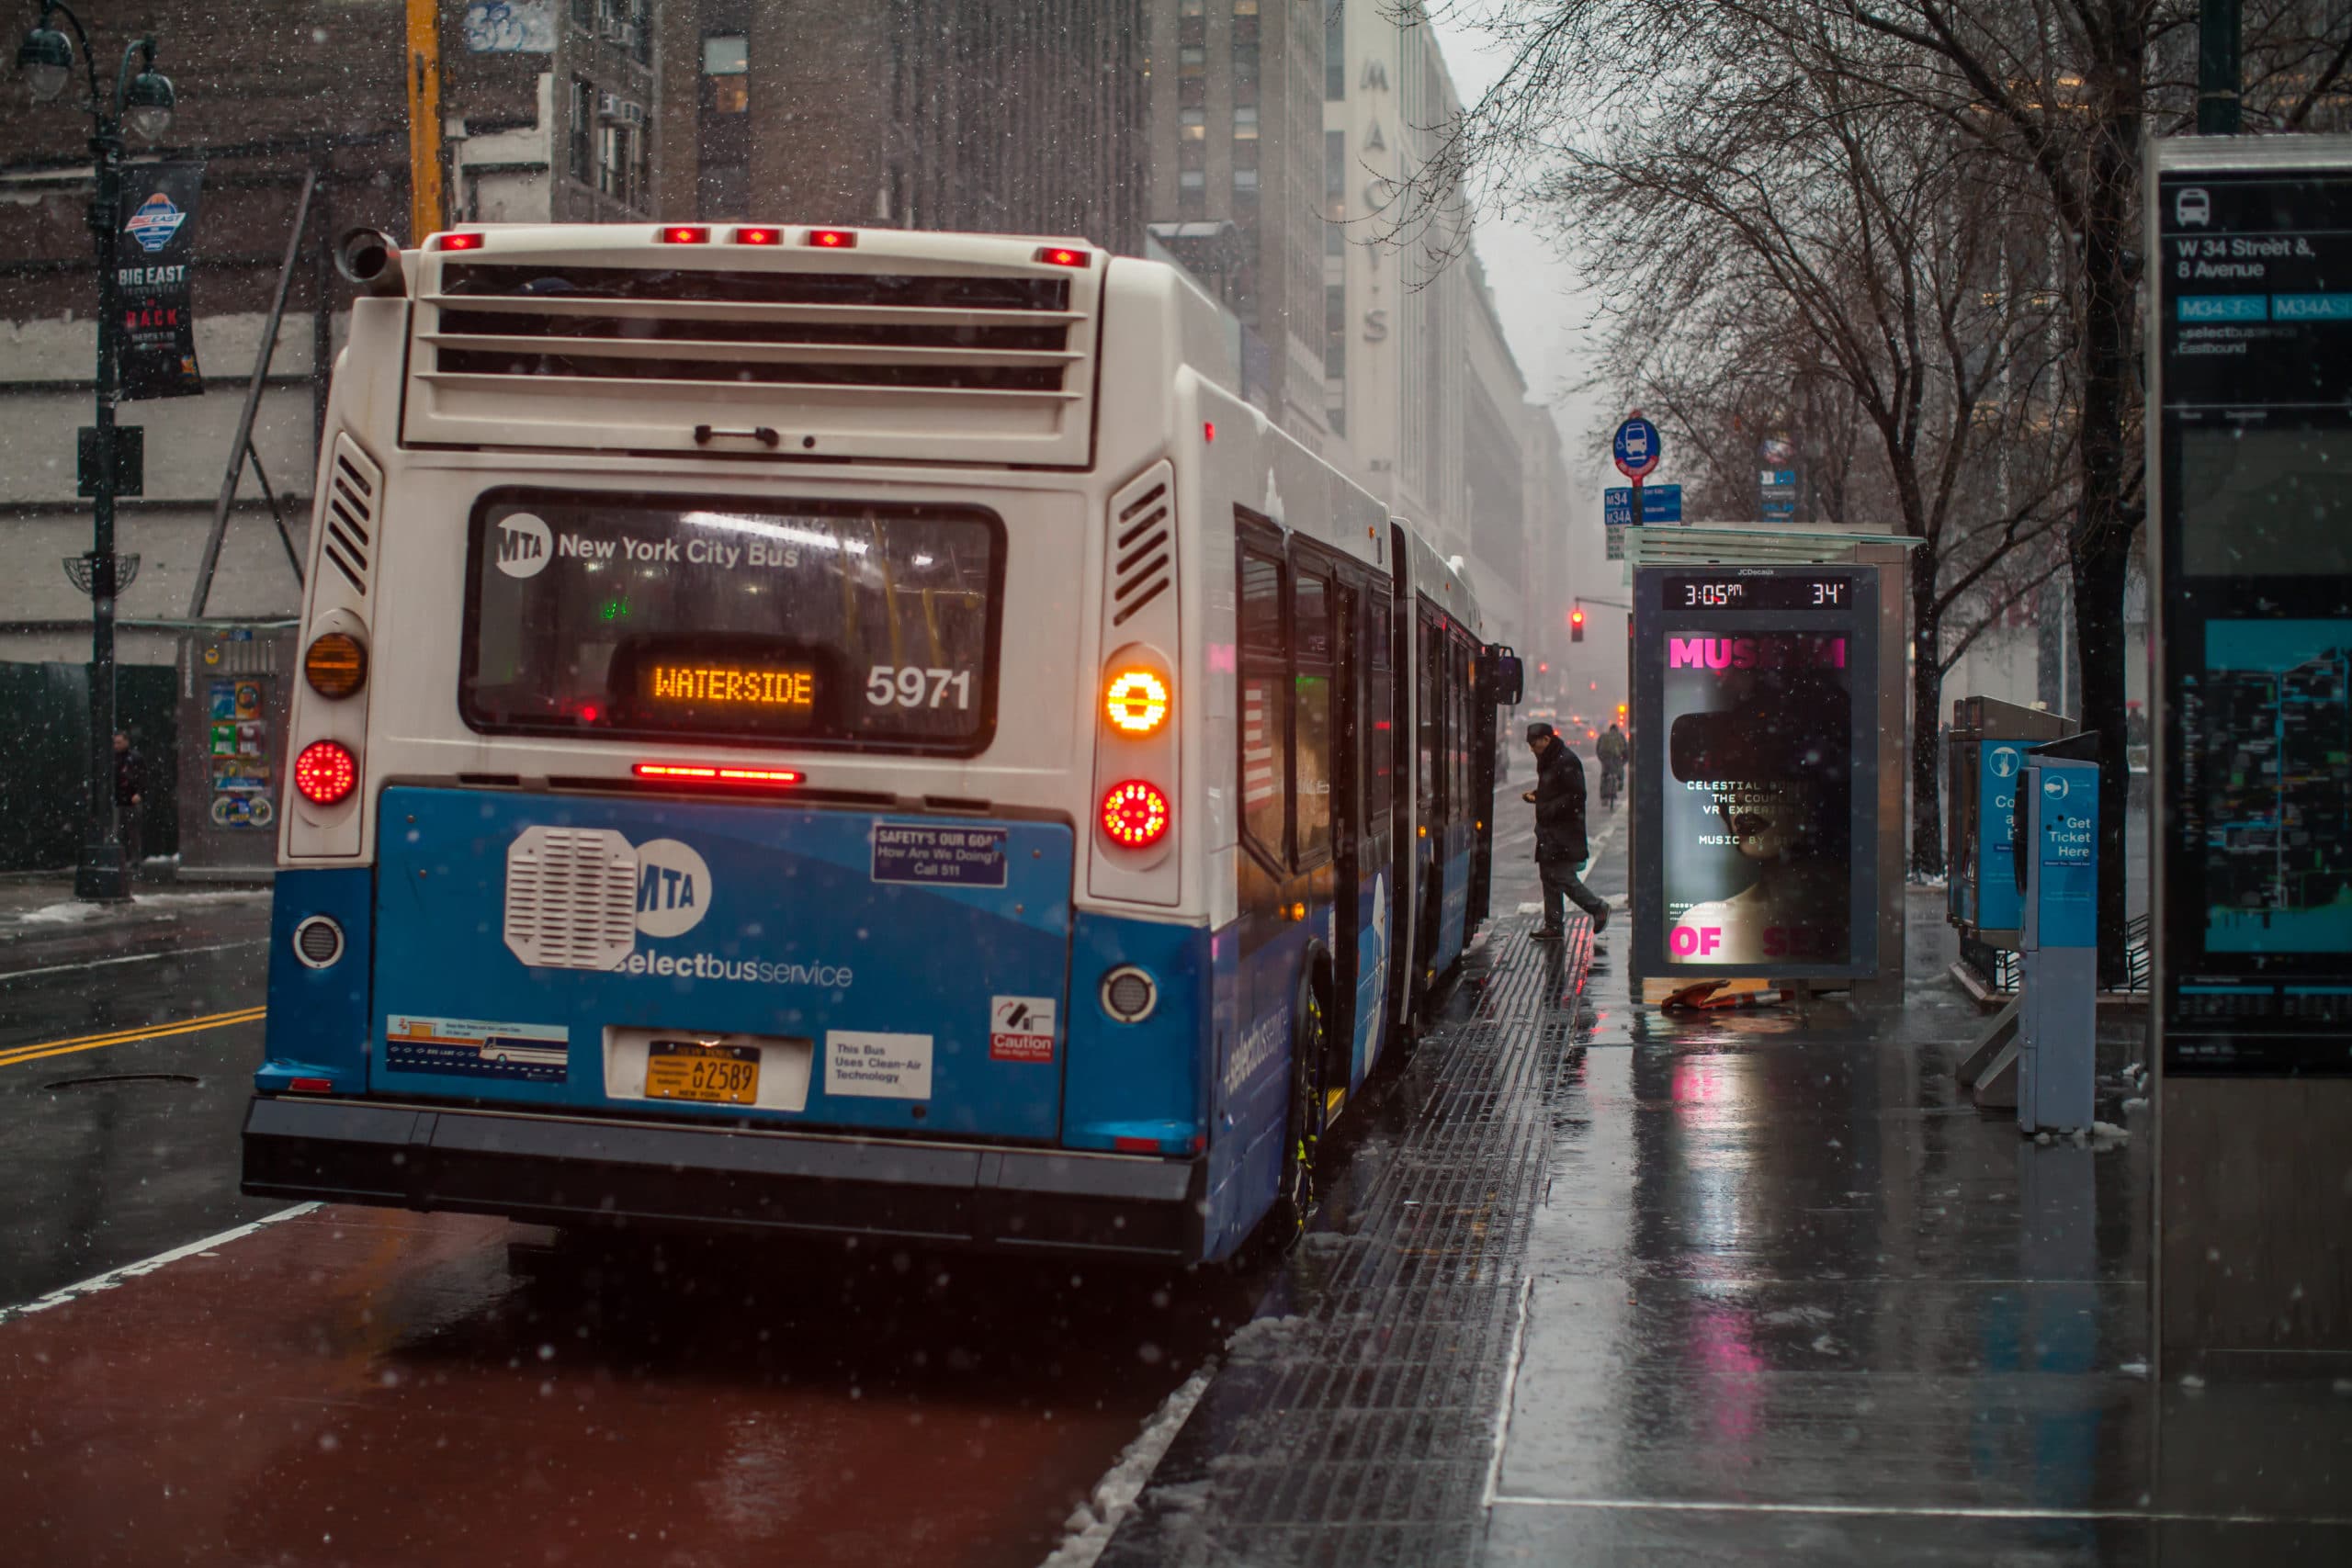 New York City MTA bus at a bus stop. A man in a coat enters the front door of the bus. The roadway is wet and glossy. Traffic lights, trucks and cars visible on the photo. High-rise buildings on the left and right. In the distance, skyscrapers are in snowy haze. Snow continues to fall and snowflakes are visible flying in the air. Penn station area. Slippery. Very bad weather. Evening. March 07, 2018. NYC. Midtown Manhattan. New York. USA